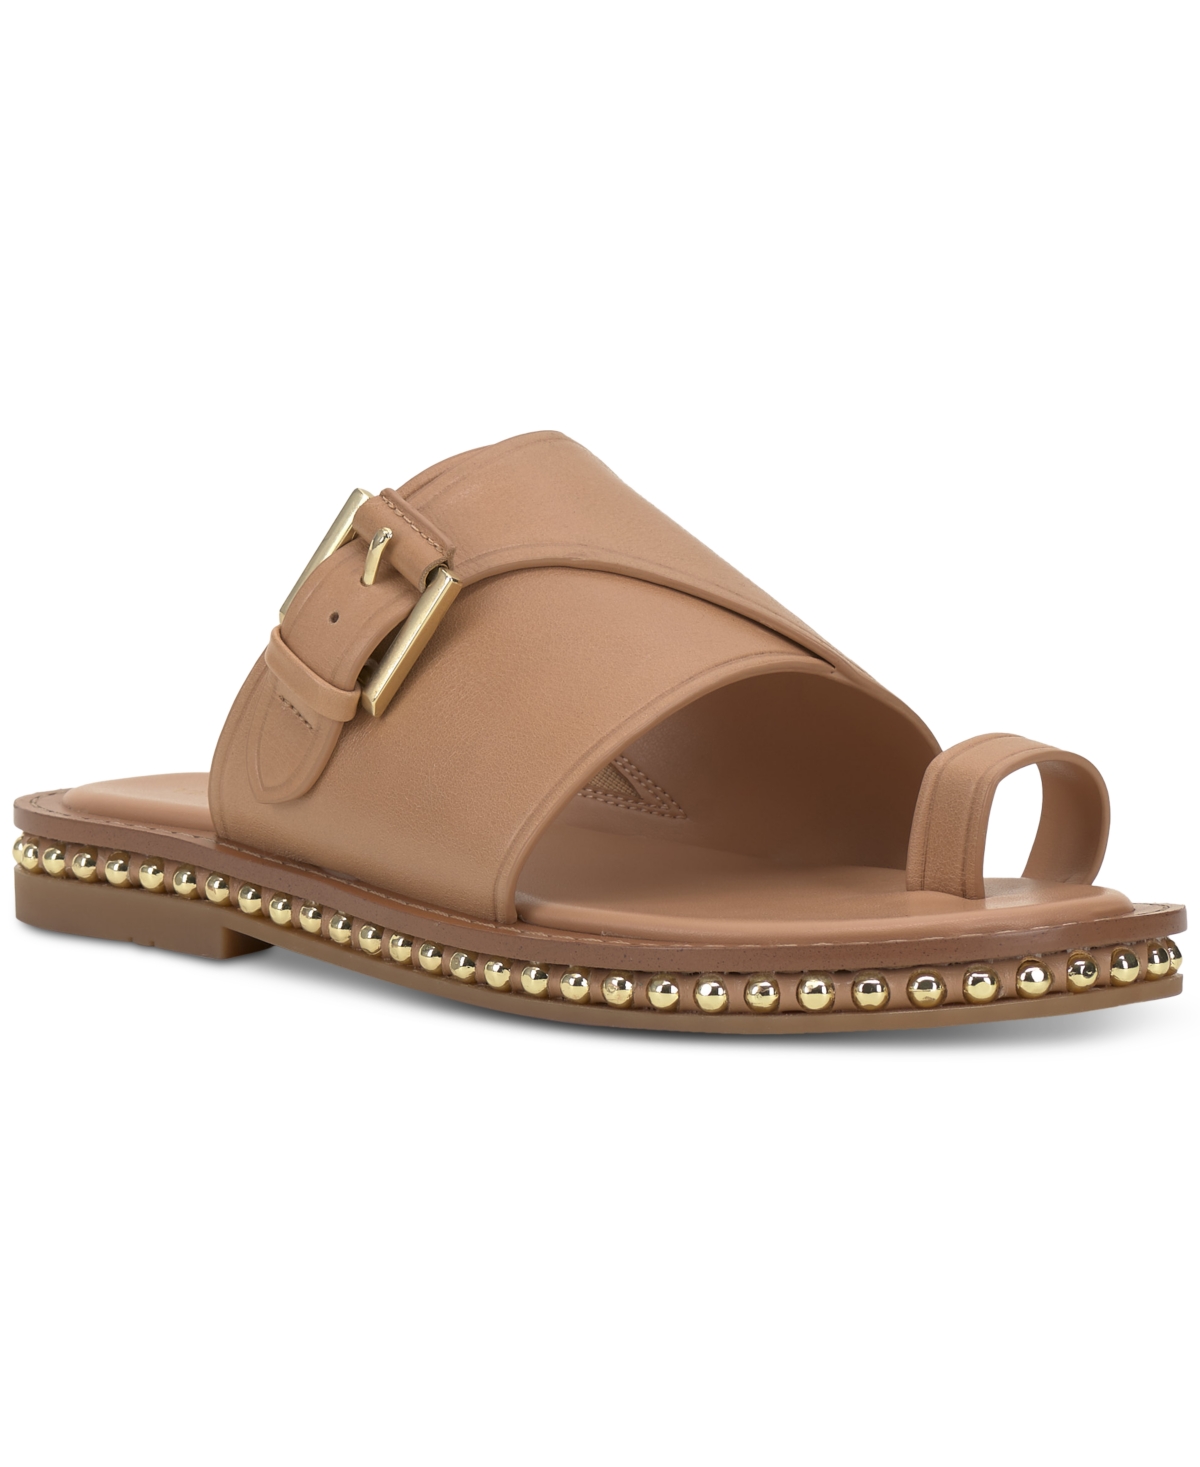 UPC 196672388628 product image for Vince Camuto Women's Cooliann Hooded Thong Flat Sandals Women's Shoes | upcitemdb.com